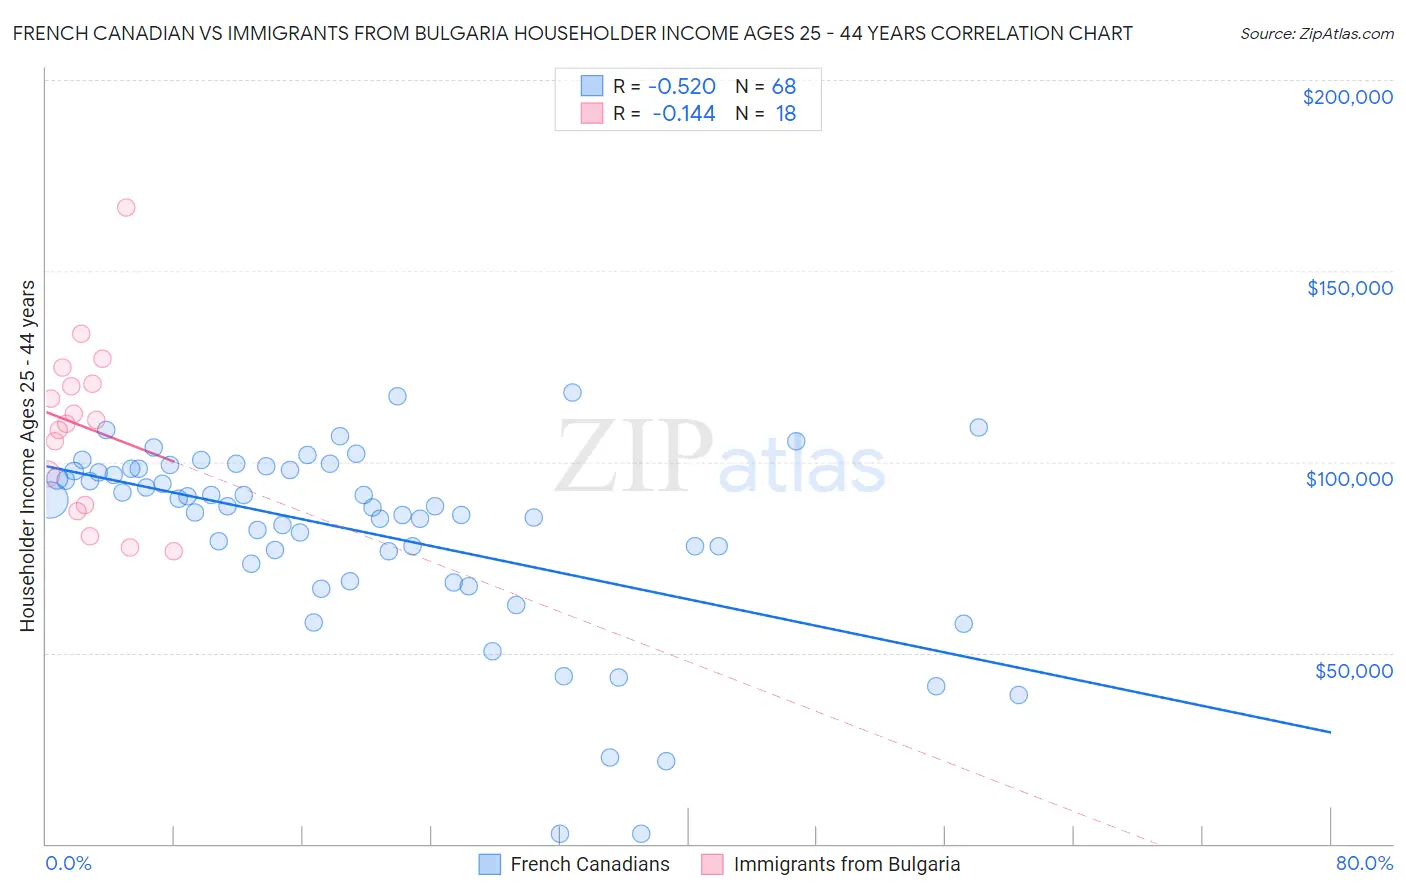 French Canadian vs Immigrants from Bulgaria Householder Income Ages 25 - 44 years